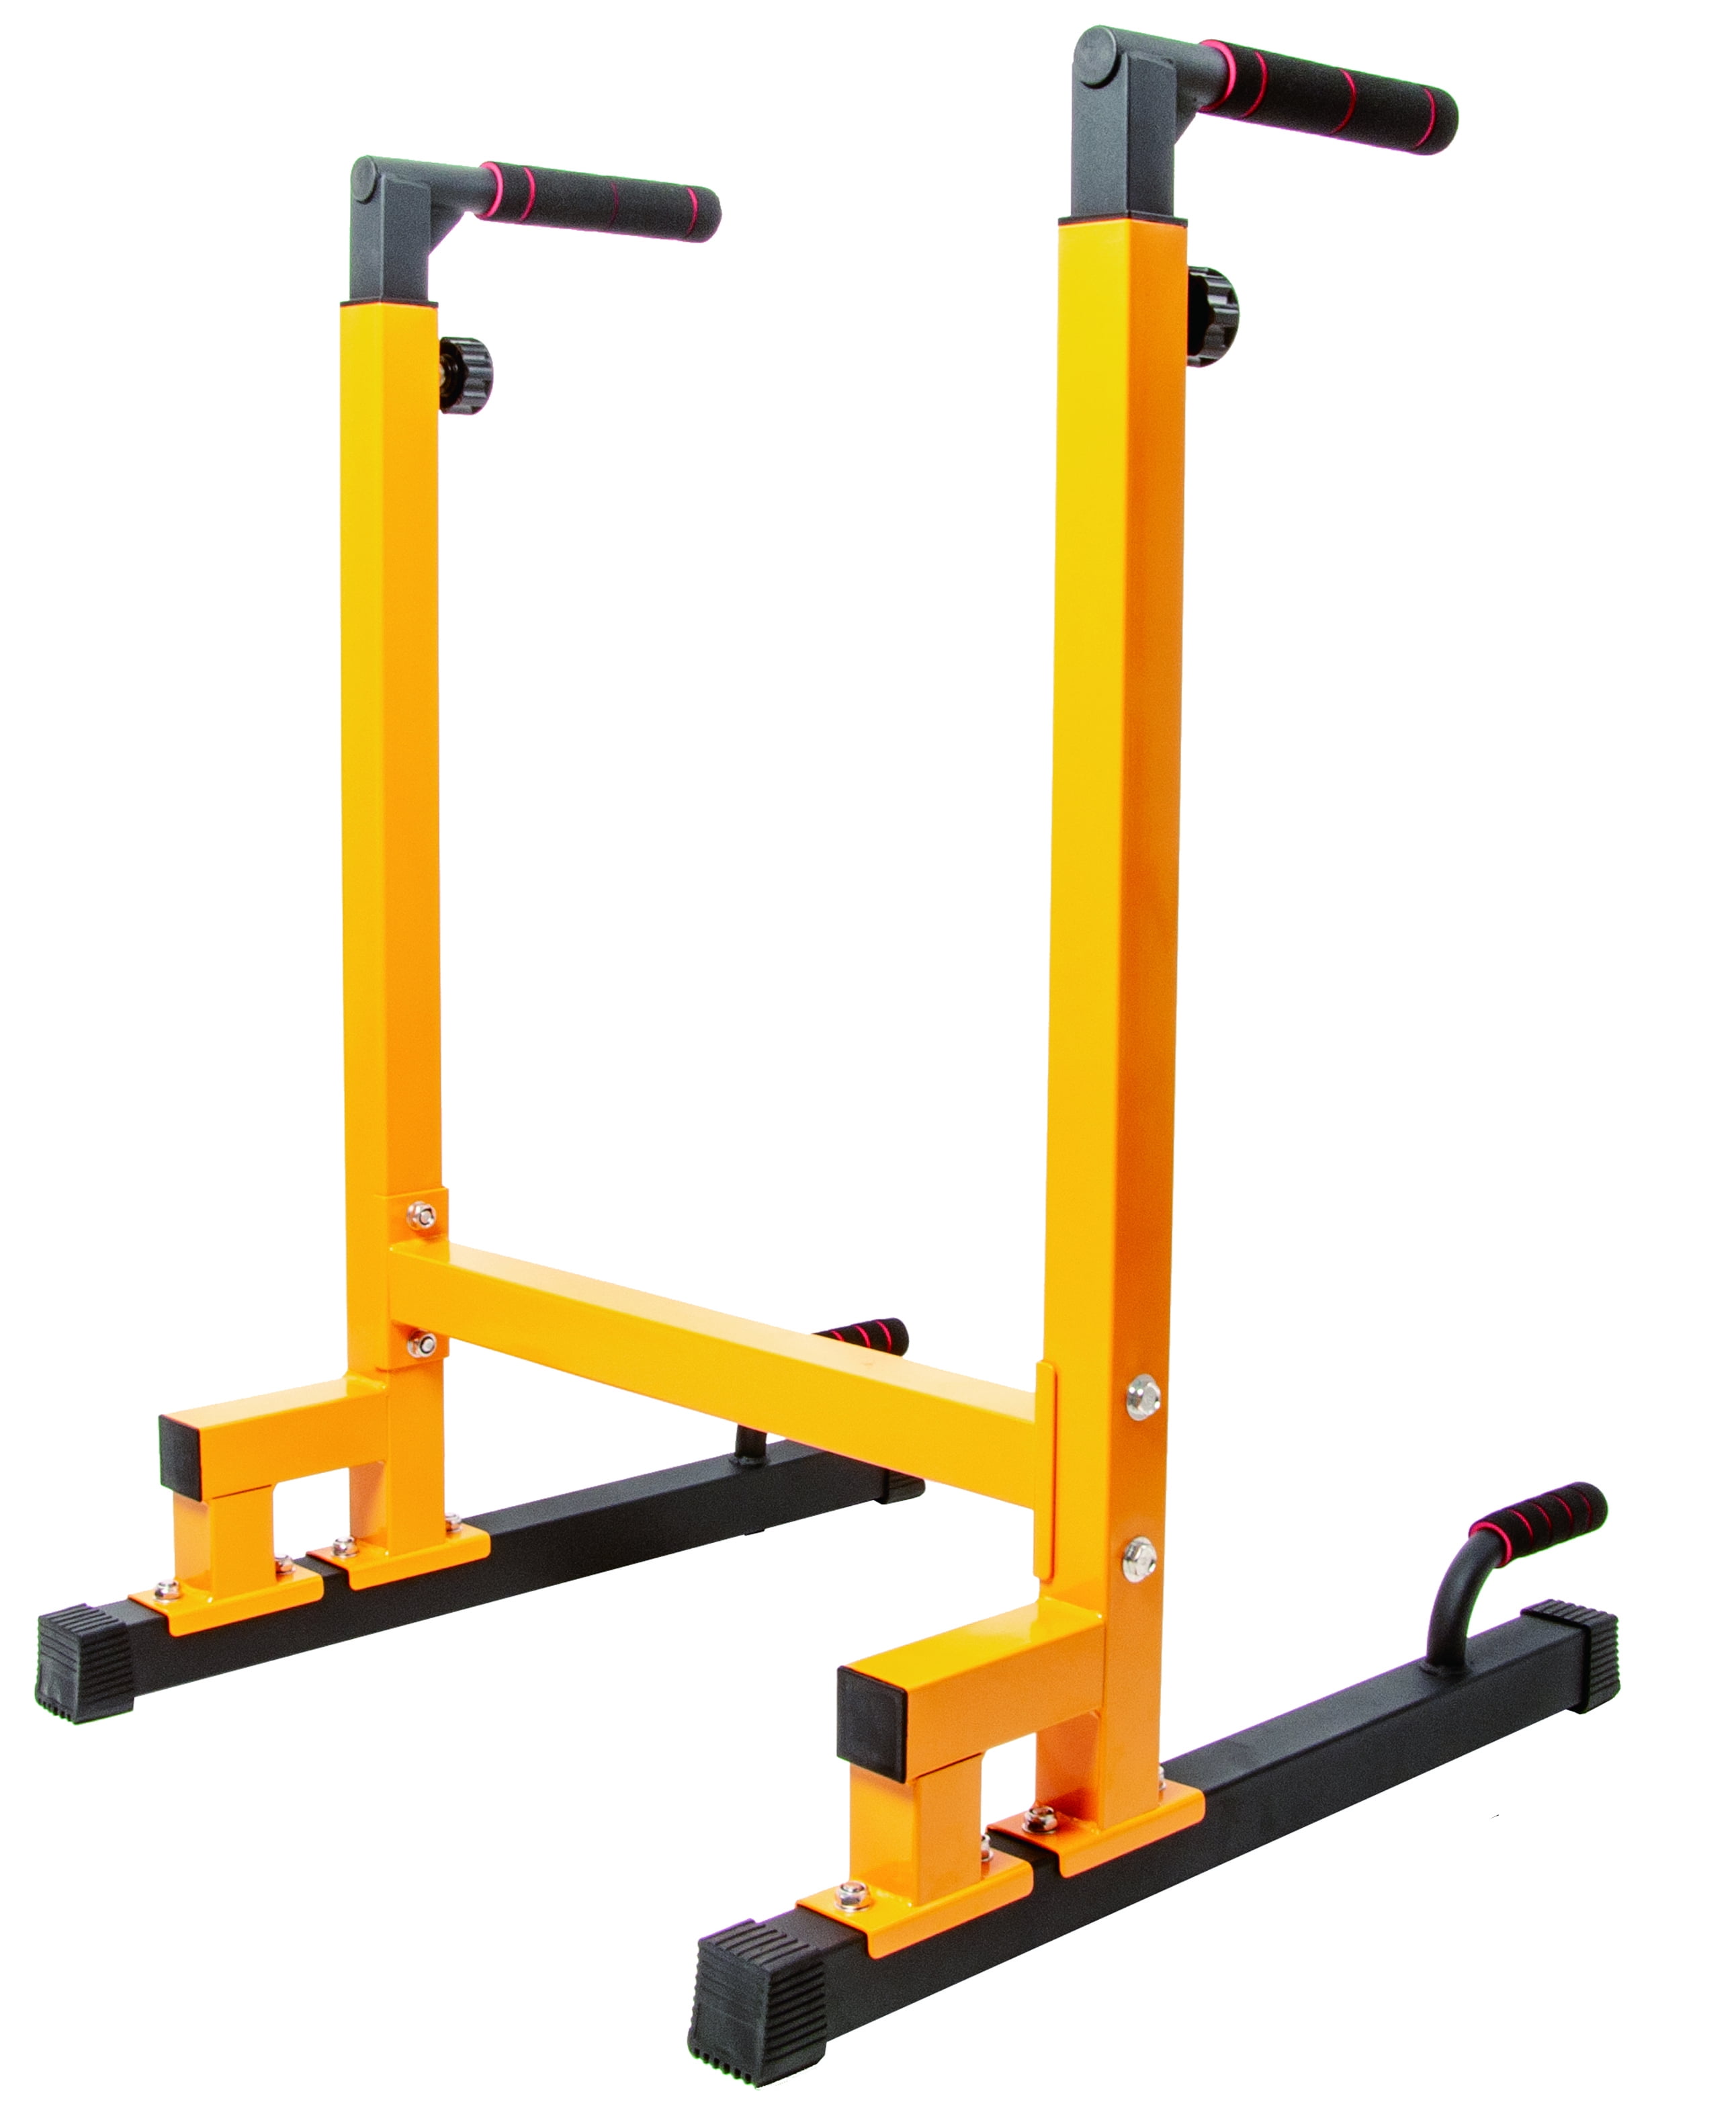 Dip Station Functional Heavy Duty Dip Stands Fitness Workout Dip Bar Station USA 